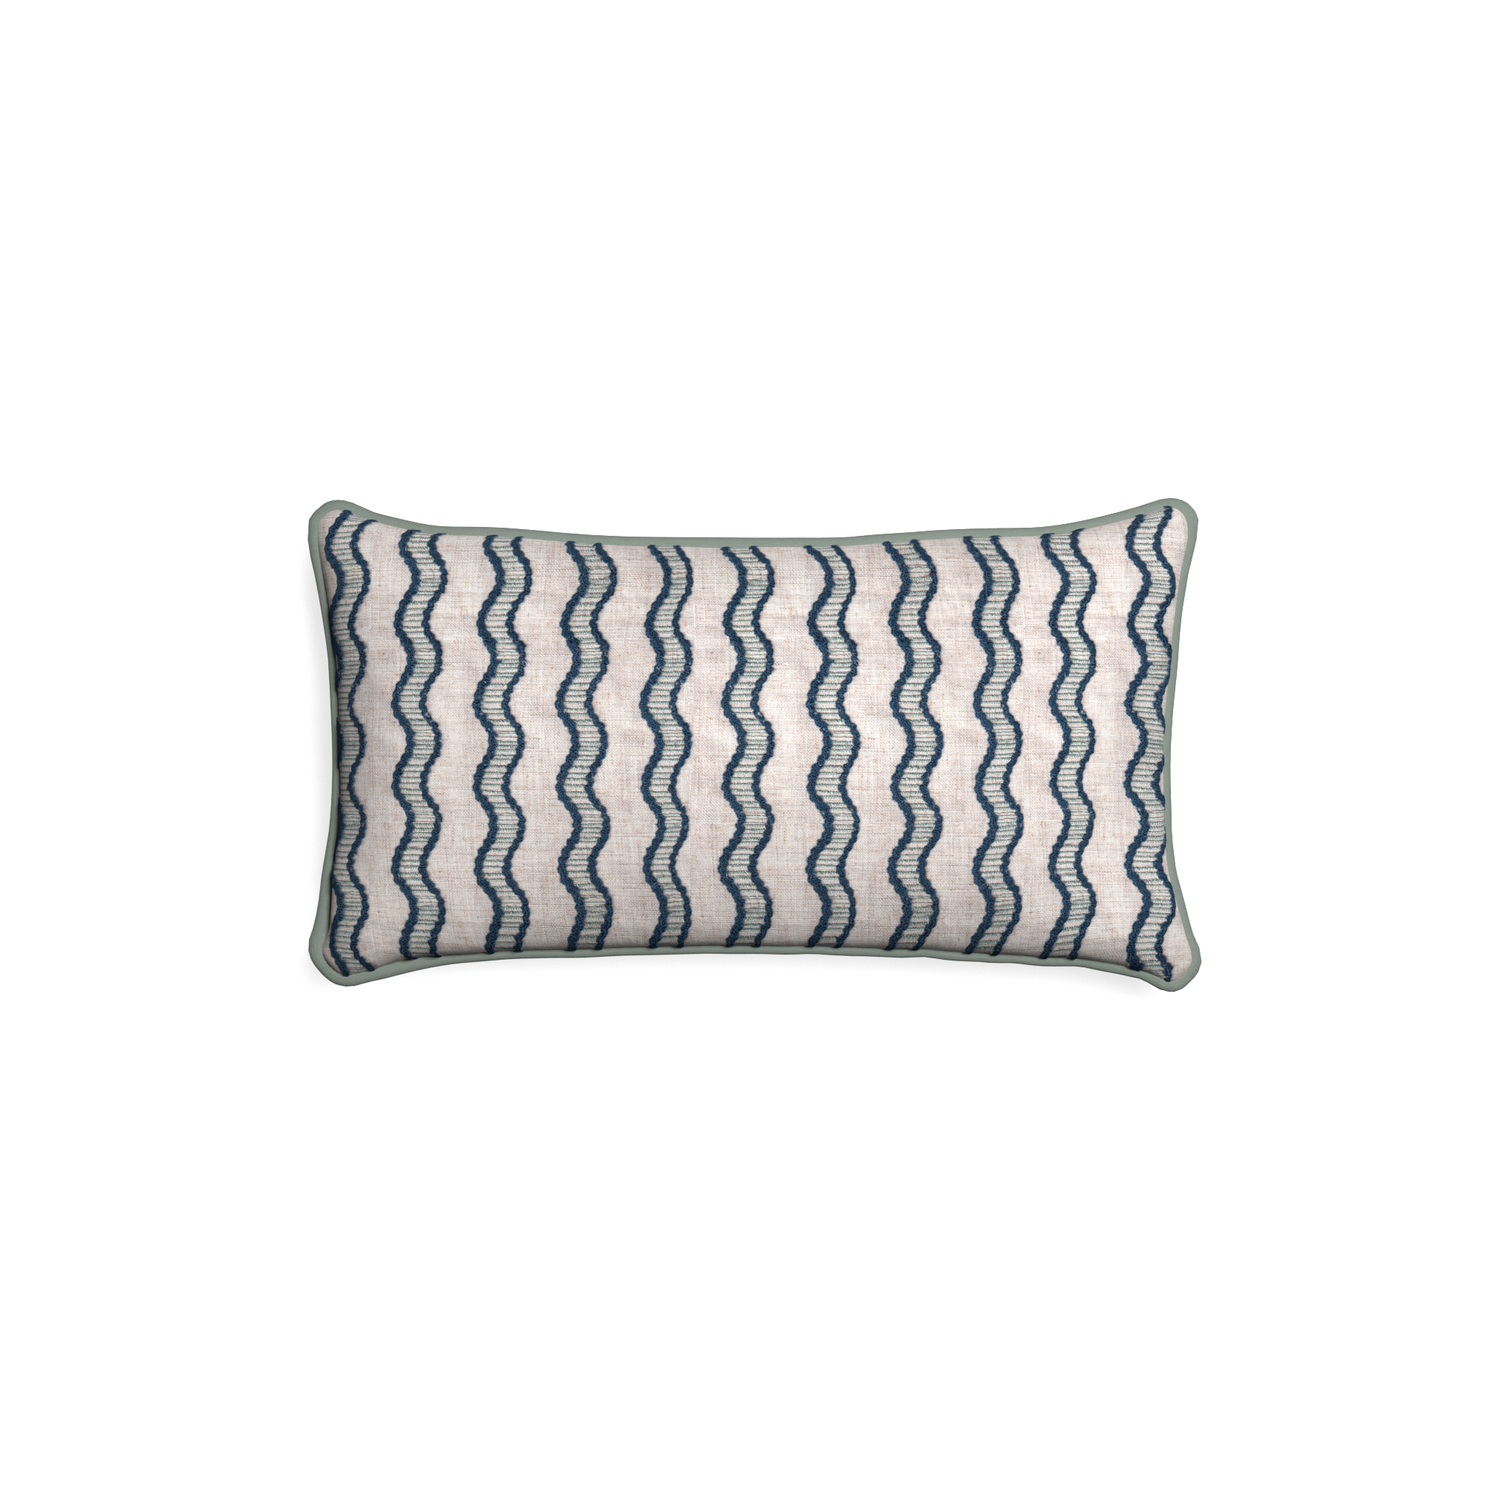 Petite-lumbar beatrice custom embroidered wavepillow with sage piping on white background